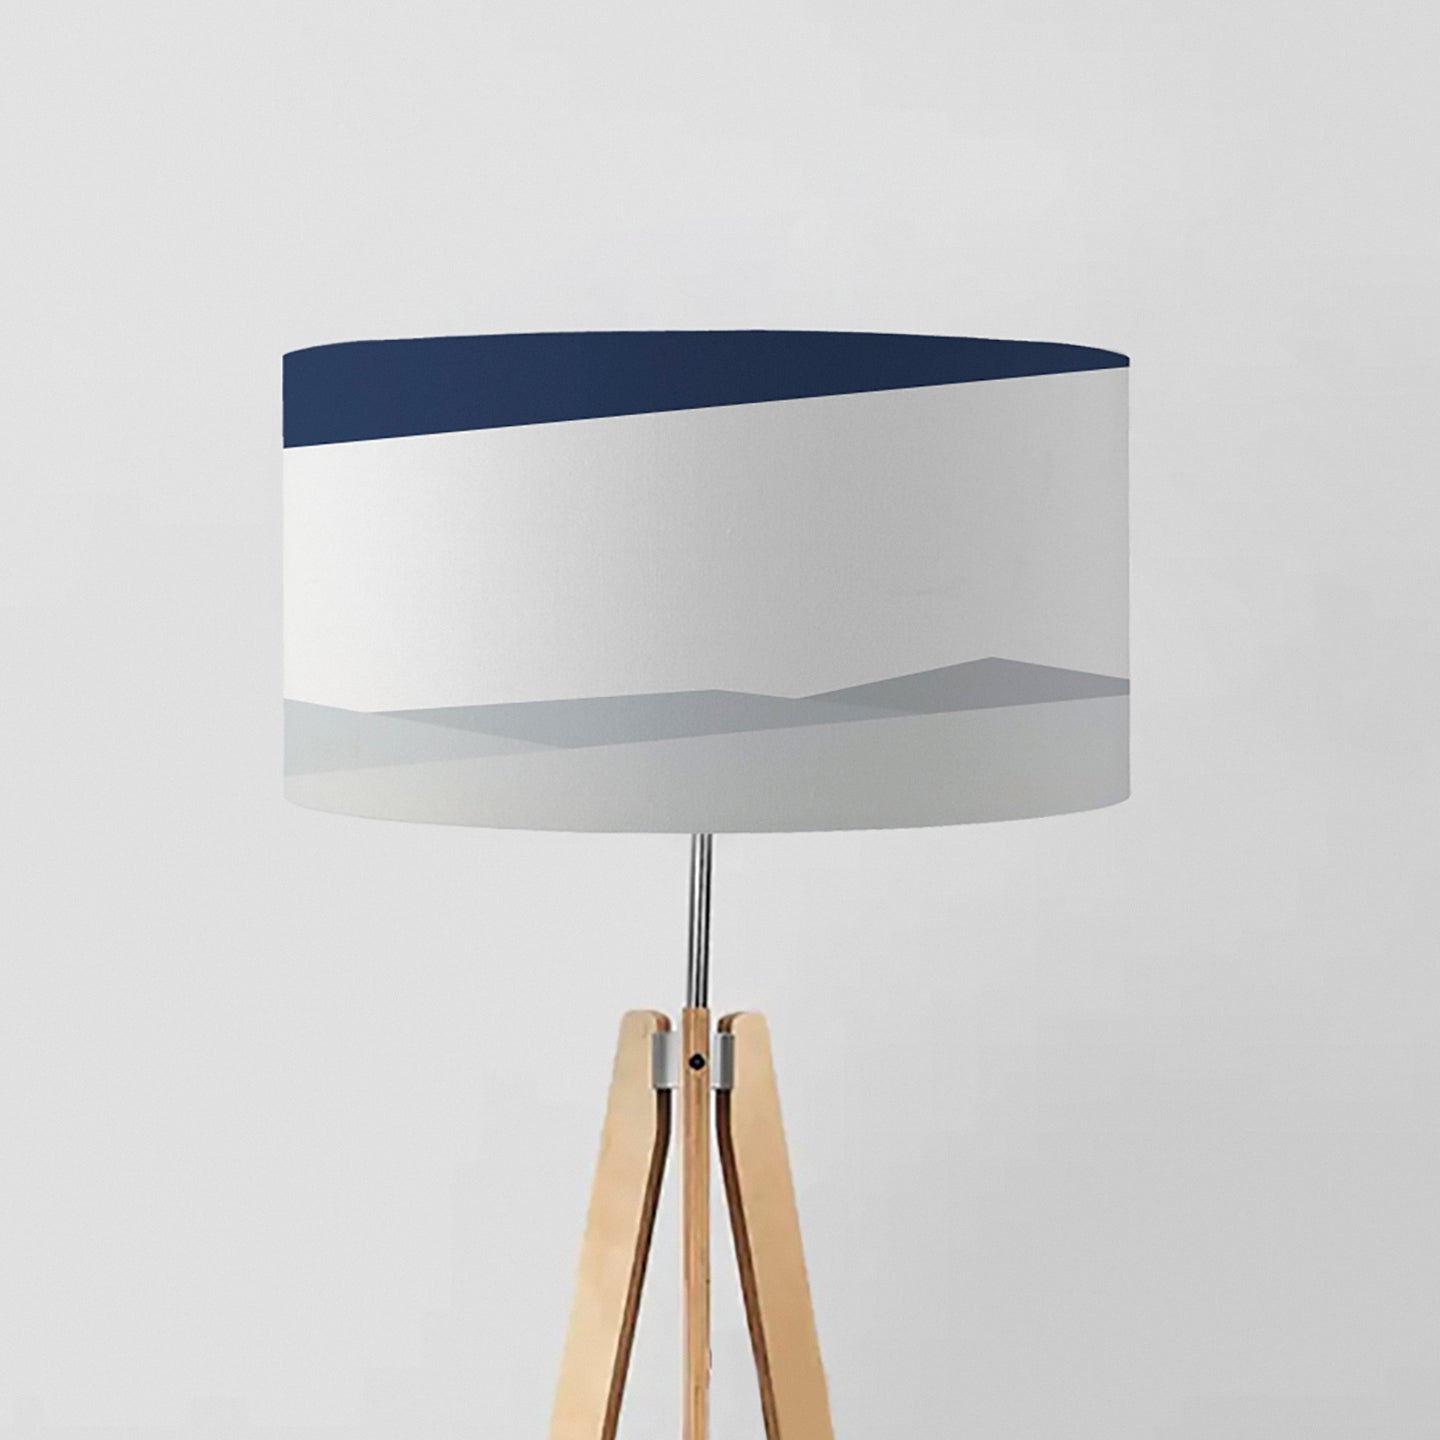 This lampshade merges the enigmatic allure of nocturnal landscapes with contemporary geometric patterns, creating an evocative centerpiece for your living space.